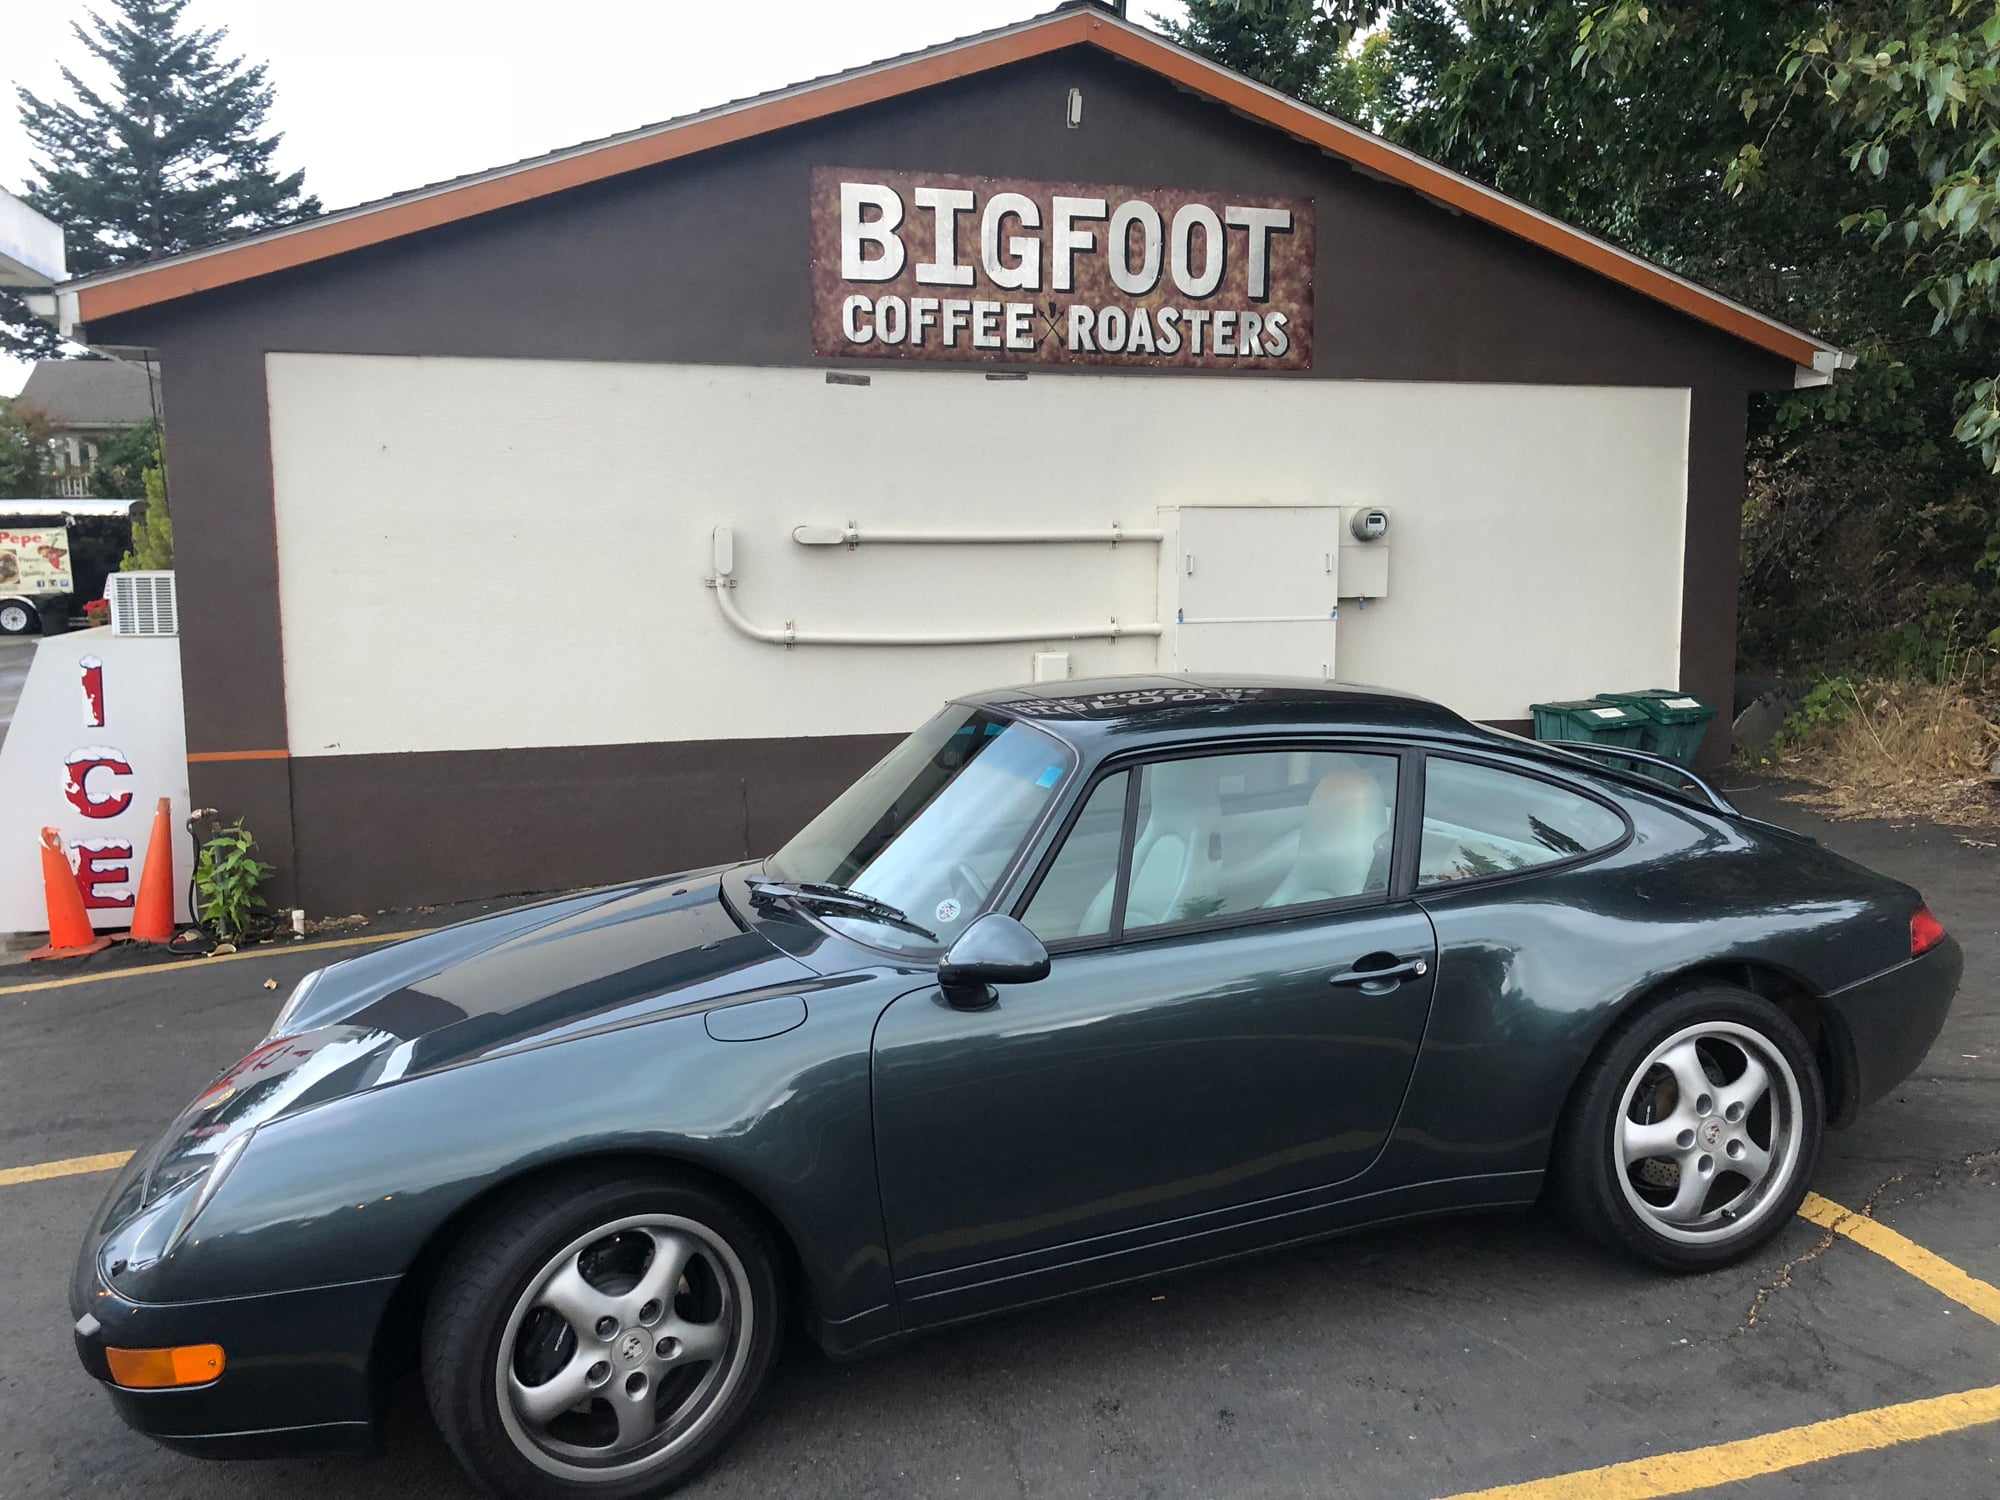 1995 Porsche 911 - FS: 1995 Aventurine Green 911 6mt - Used - VIN WP0AA299Xss320514 - 109,000 Miles - 6 cyl - 2WD - Manual - Coupe - Other - Vancouver, WA 98663, United States